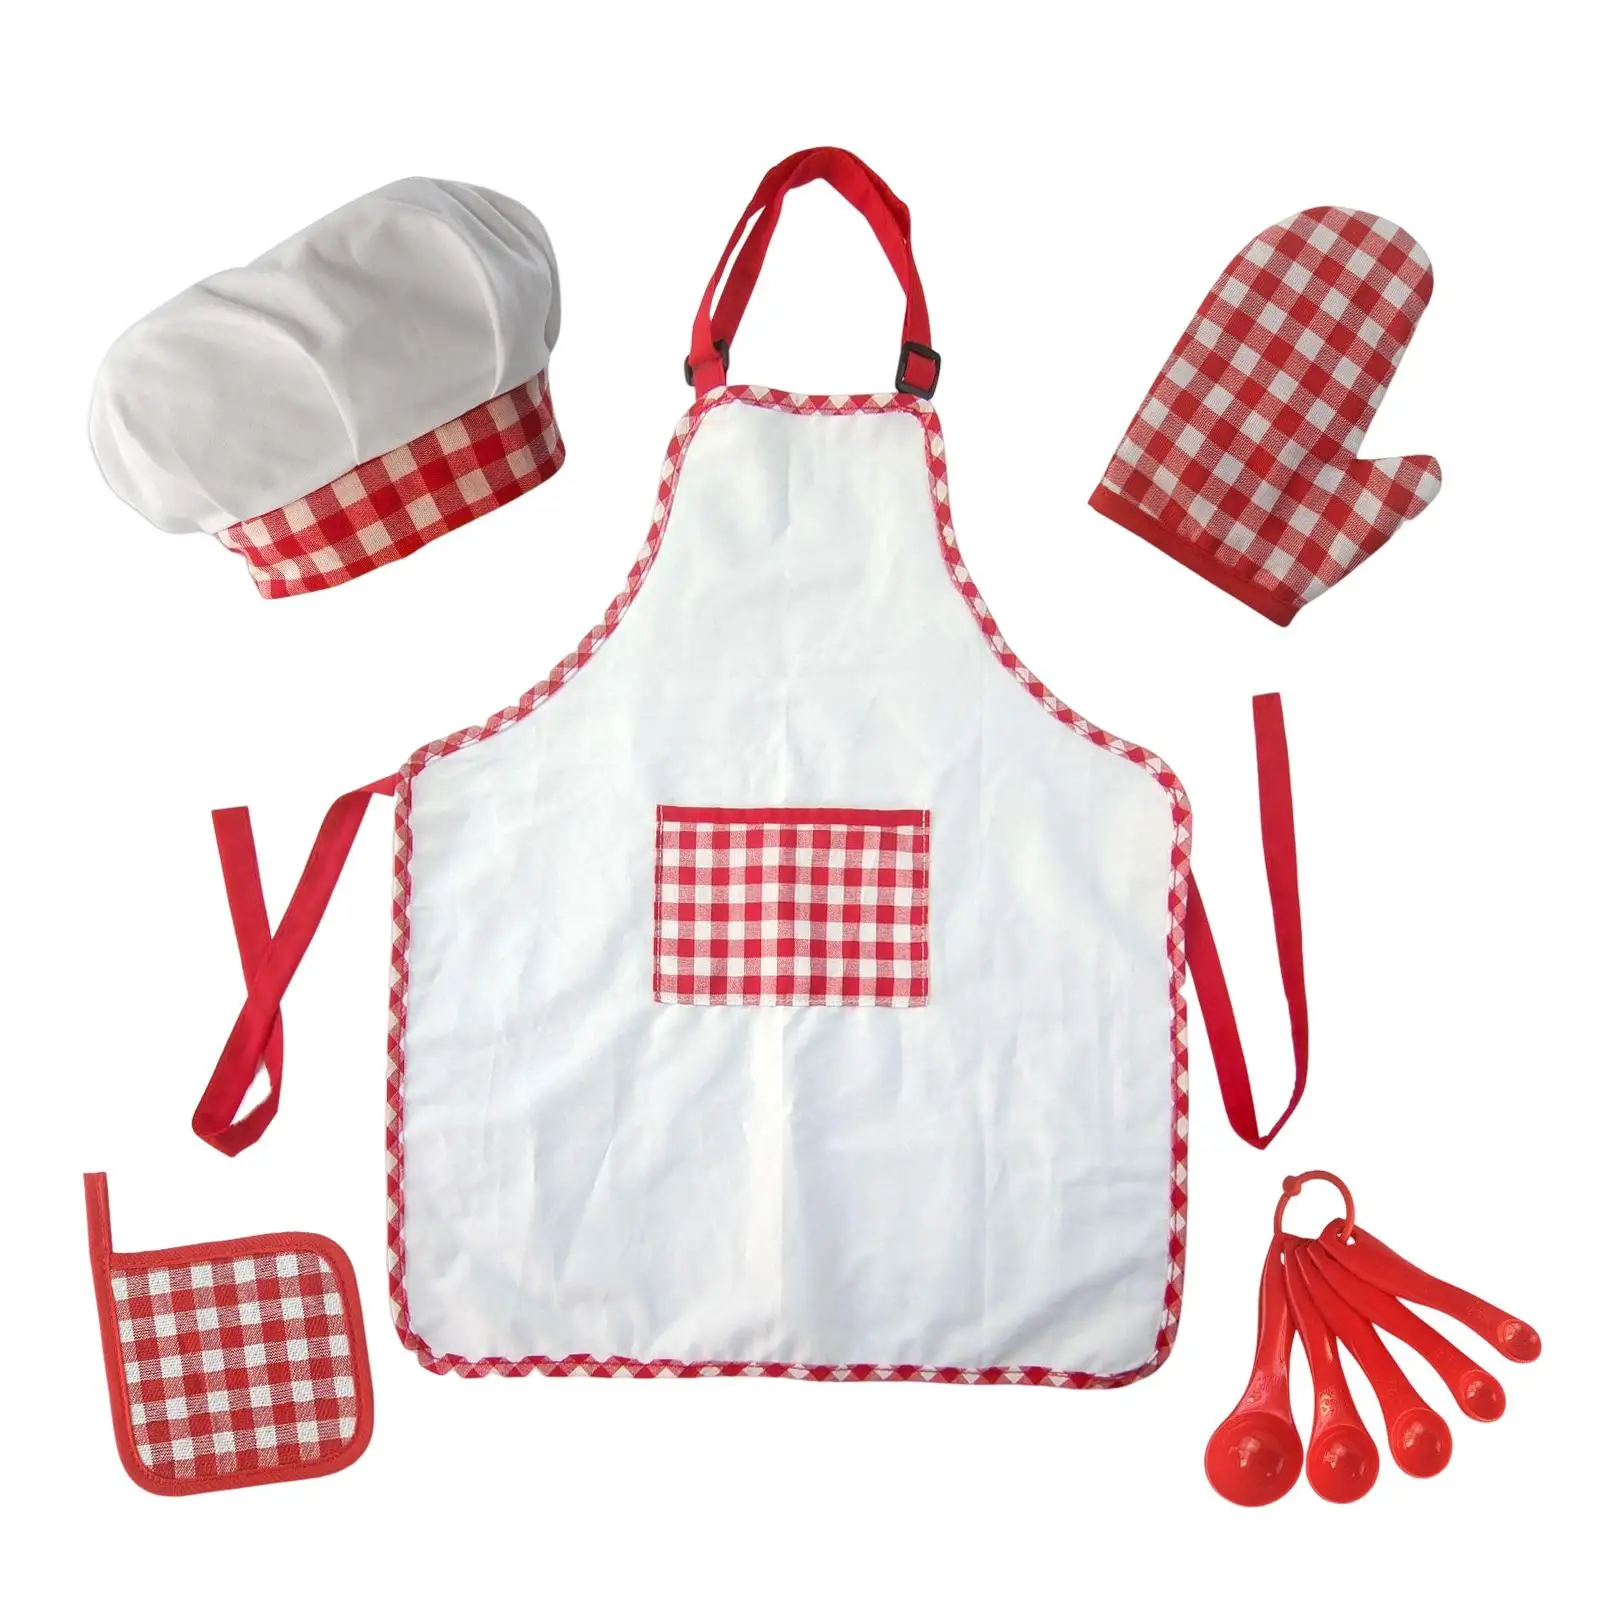 5x child cooking and Baking Set Pretend Costume Cookware Playset for Children